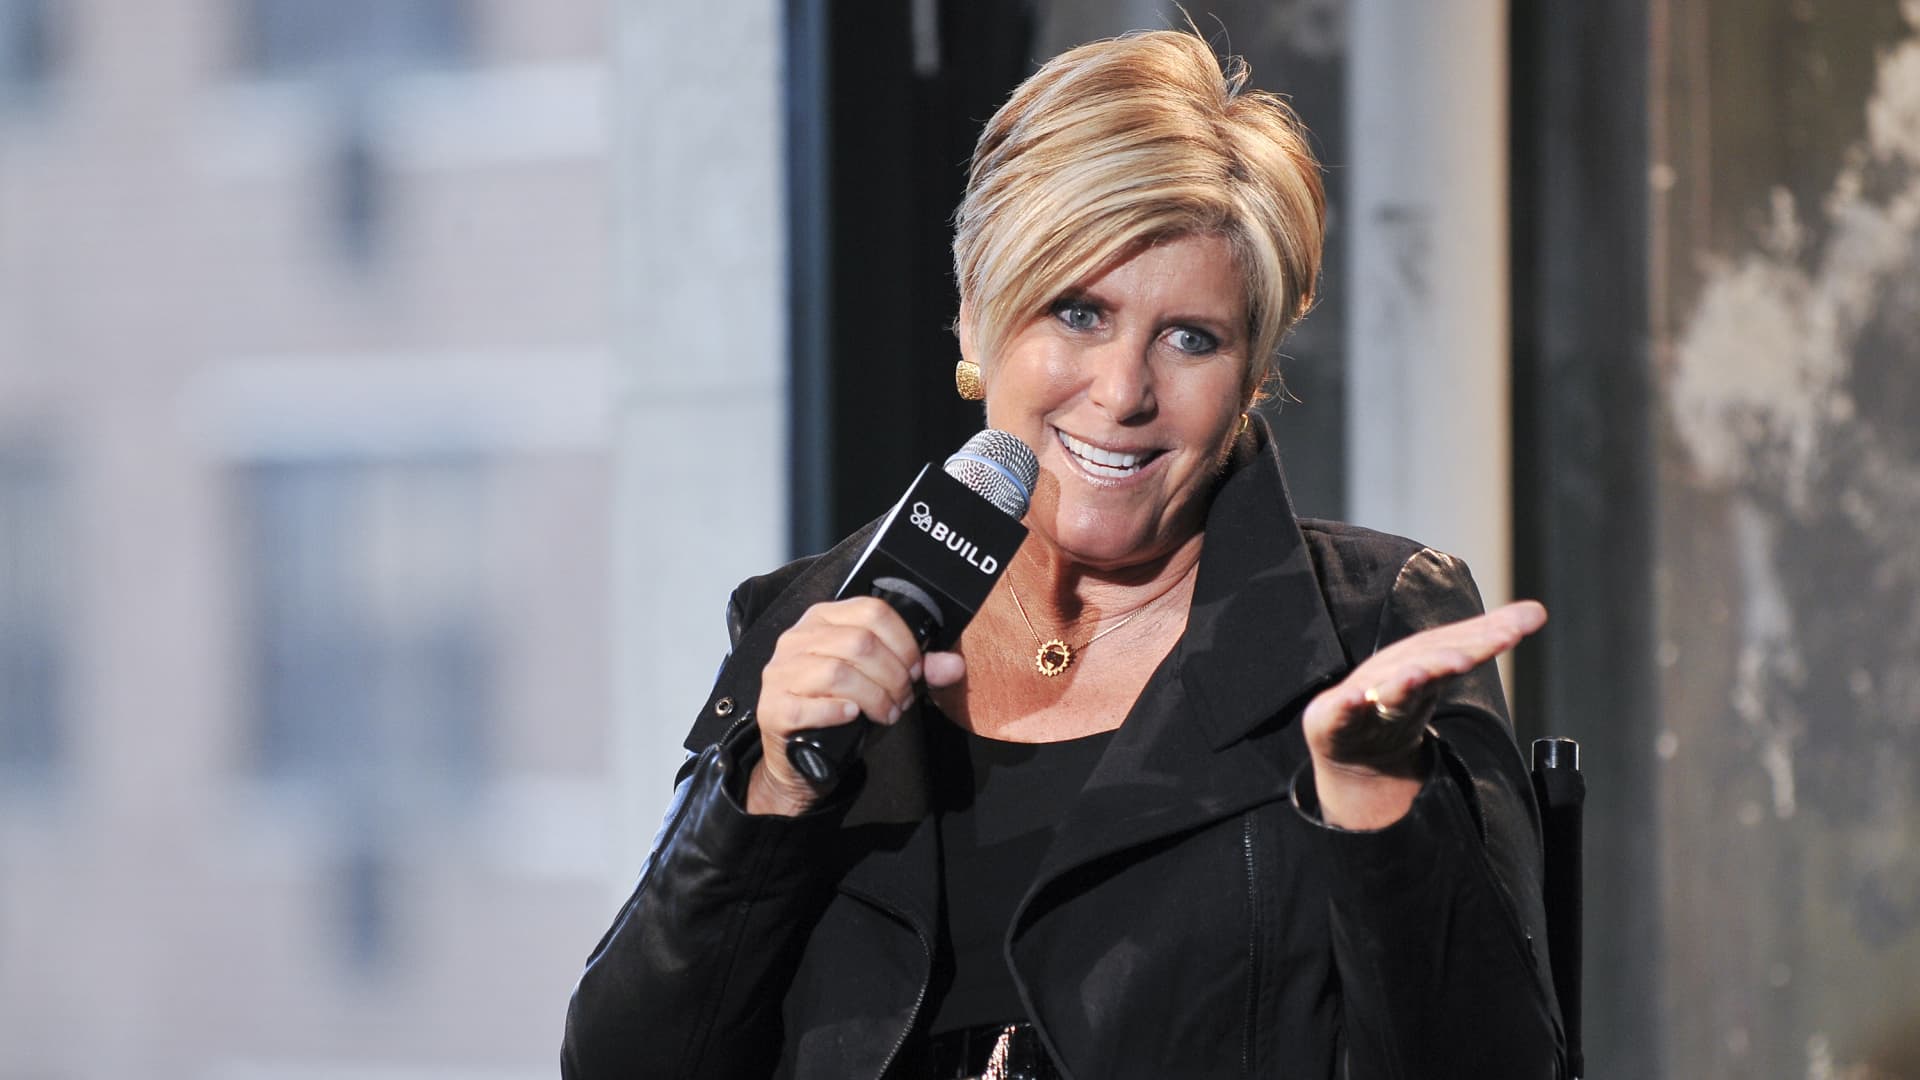 How women answer 5 questions may be a financial wake-up call, personal finance expert Suze Orman says